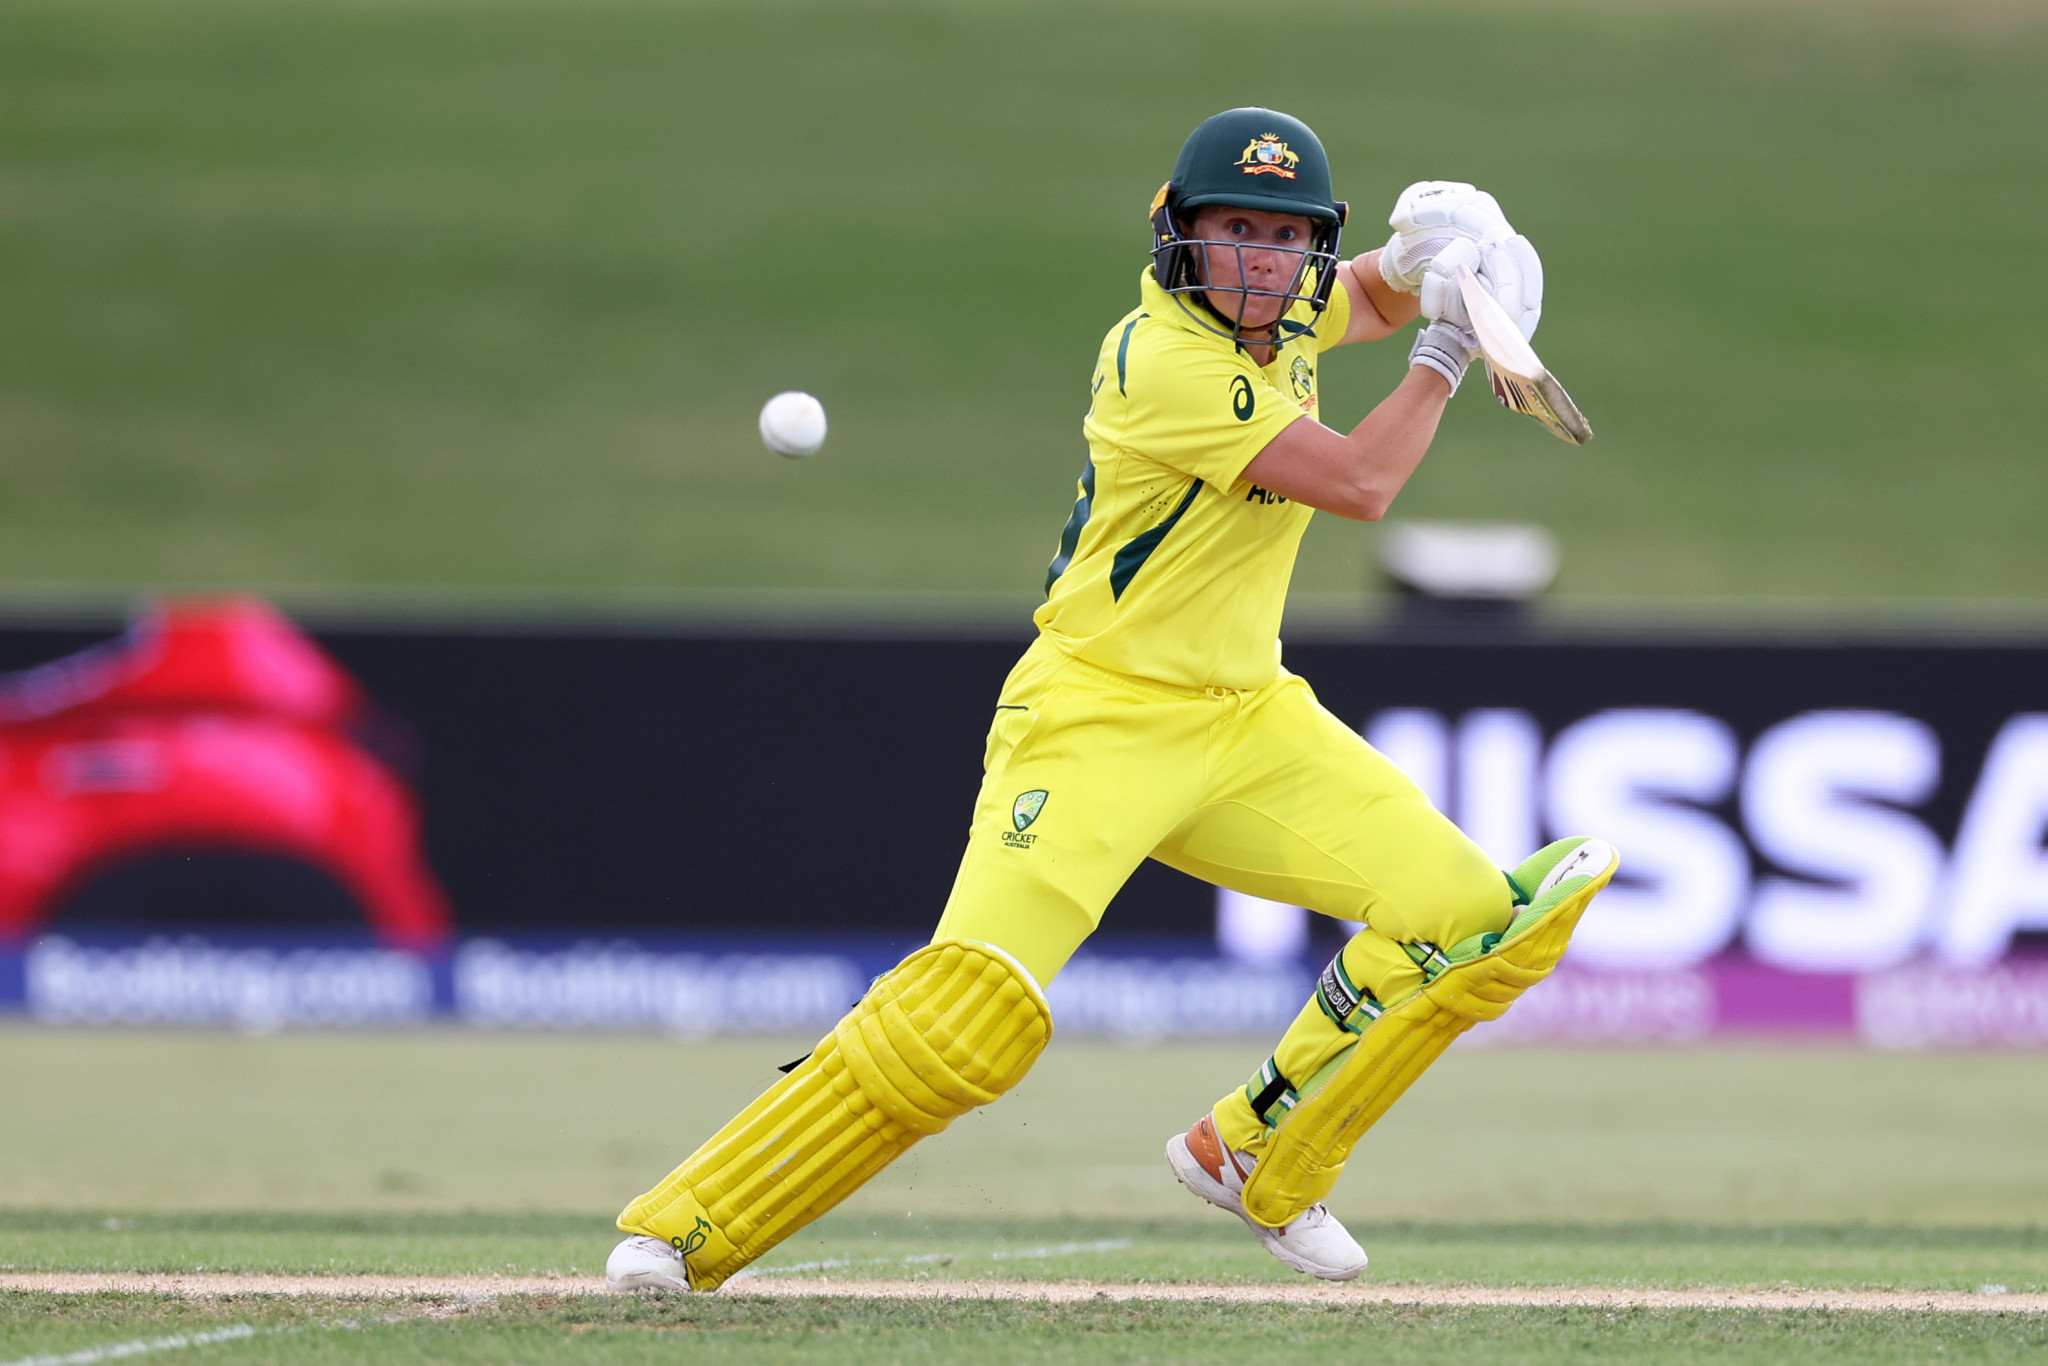 Australia impressed at the Women's Cricket World Cup with a seven-wicket win over the West Indies in Wellington ©Getty Images